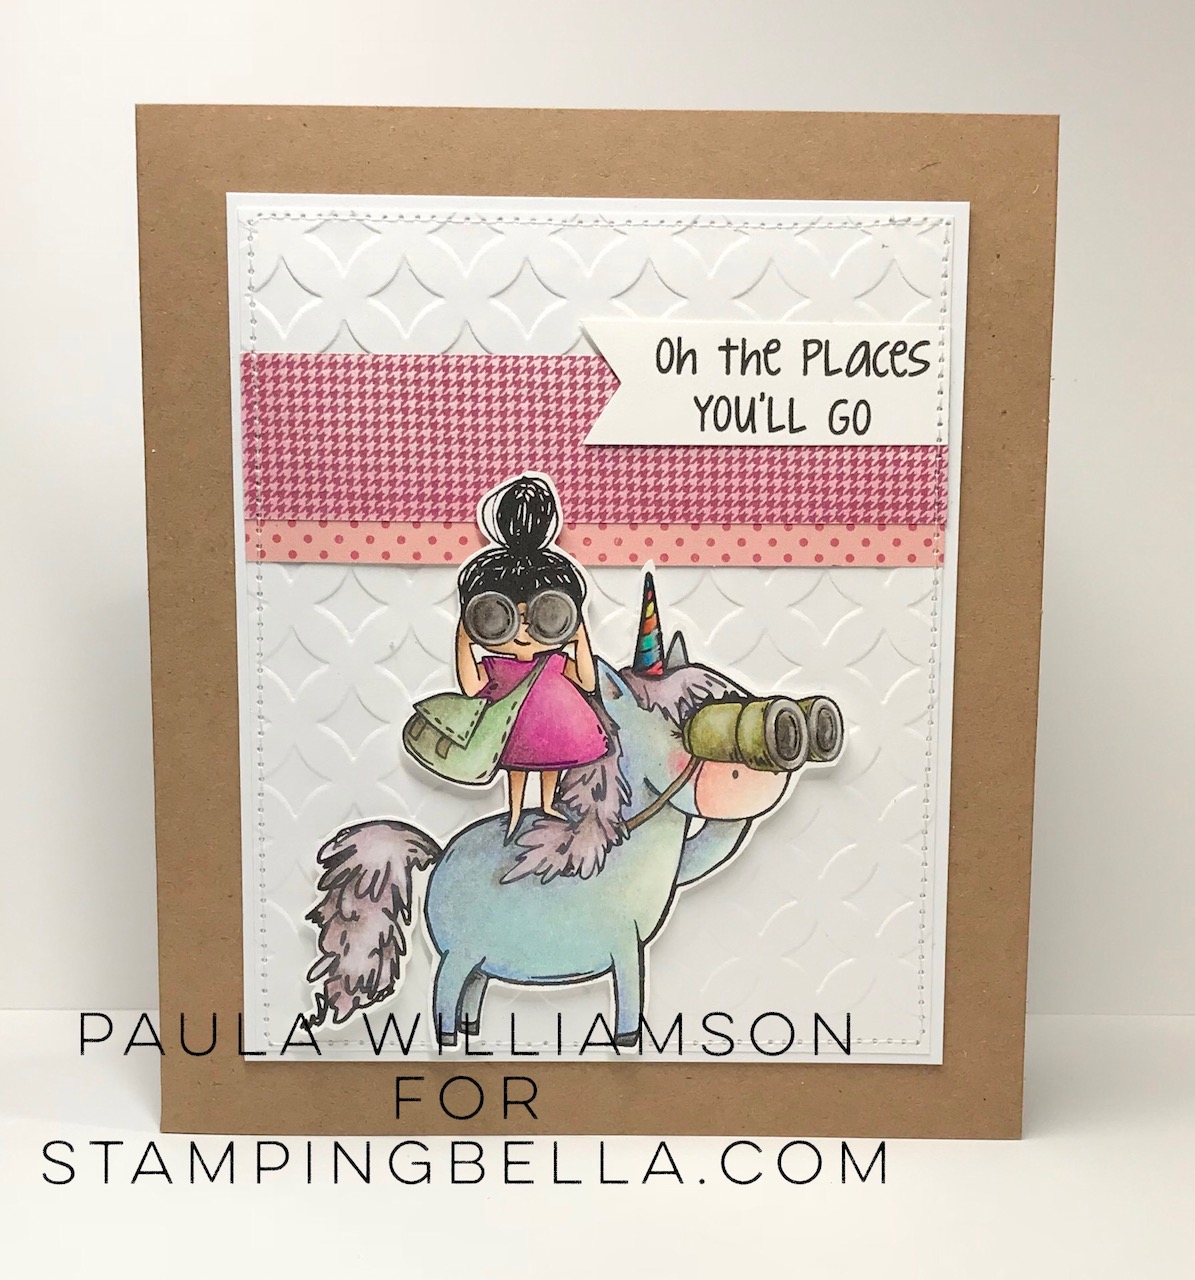 www.stampingbella.com: Rubber stamp used Rosie and Bernie LOVE TO EXPLORE and our Adventure Sentiment set. Card by Paula Williamson